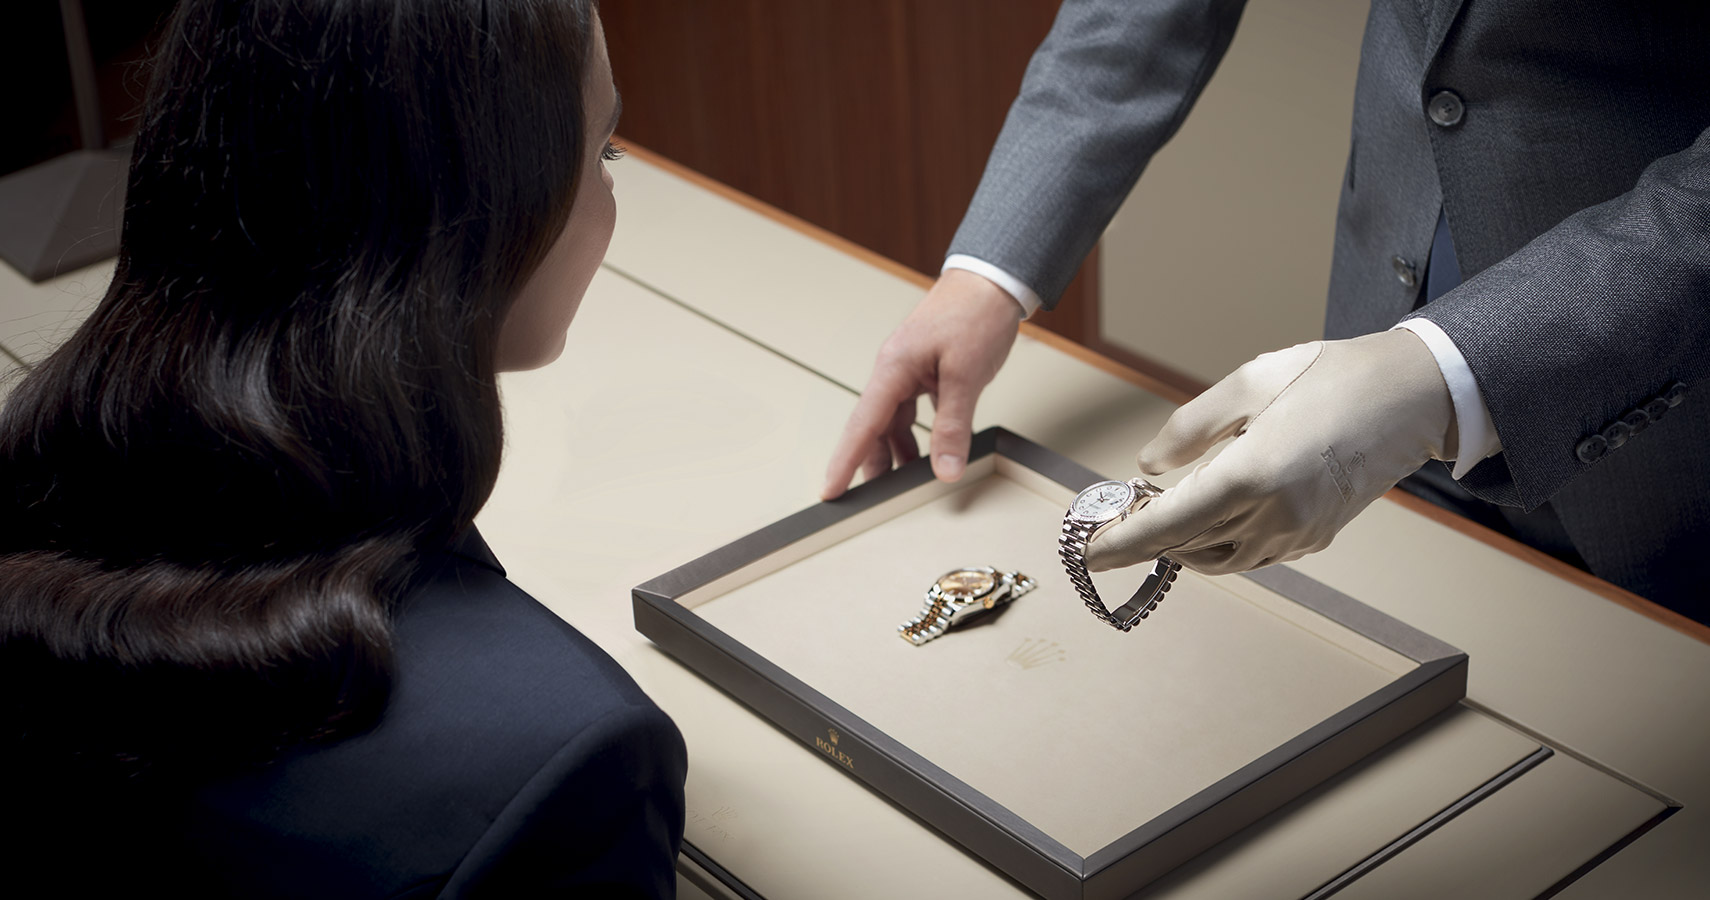 Rolex Watch being presented to a customer